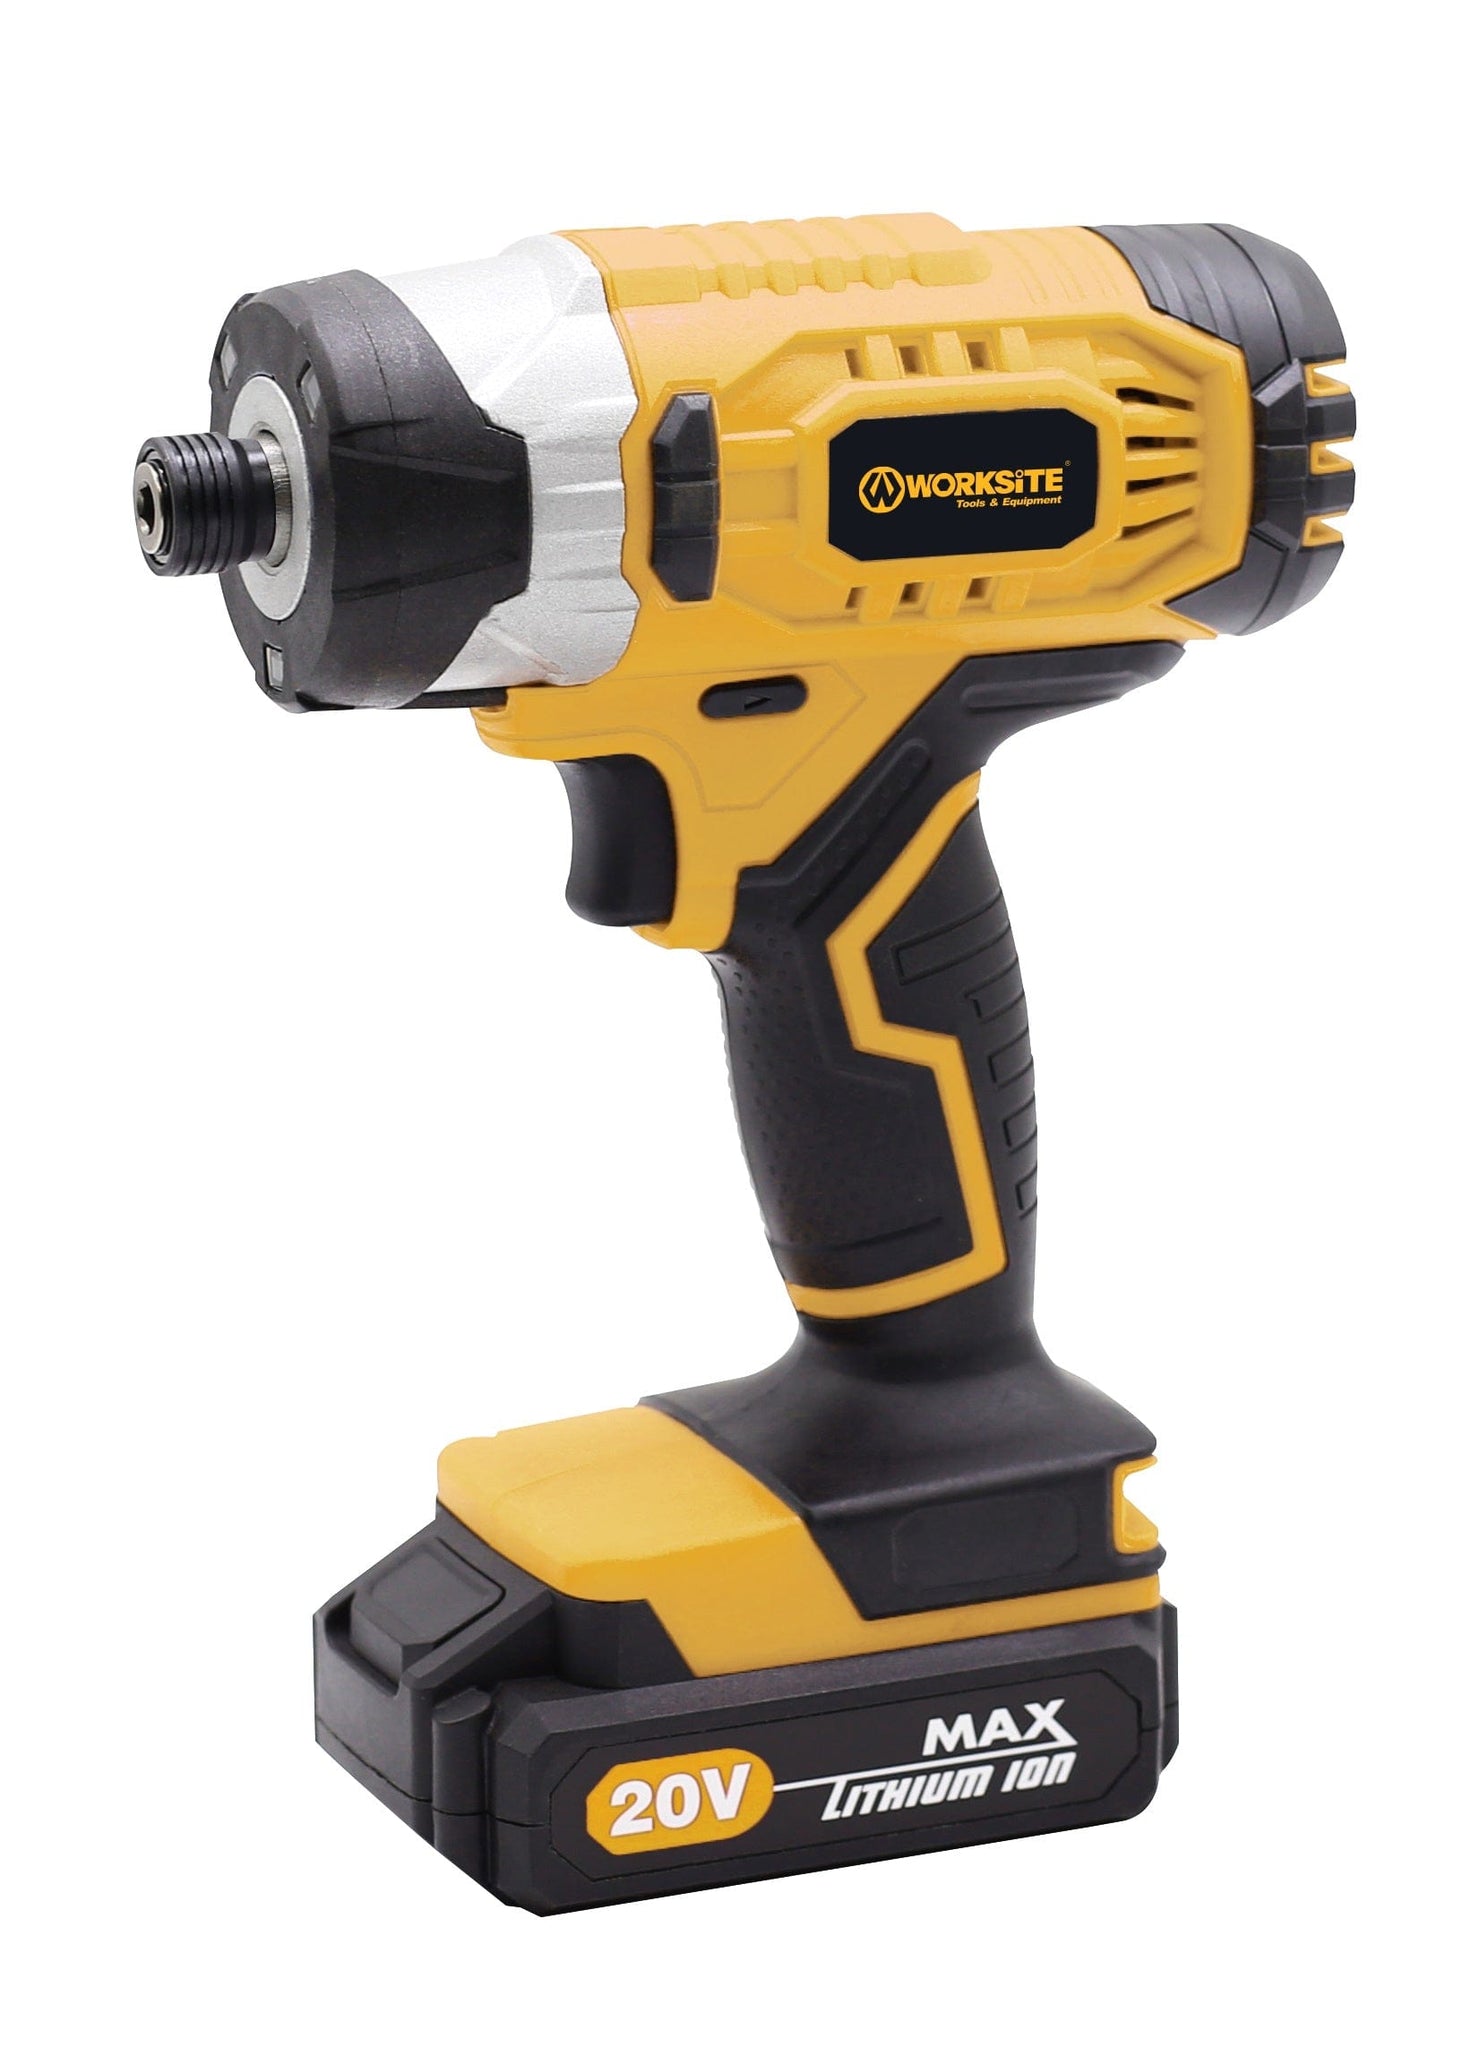 Worksite Cordless Impact Driver 20V Max, 1,590 in-lbs. of Torque, 1/4-IN. Hex with Lithium-ion Battery, Quick Charger, 1590 in-lbs. and Storage Bag Included, Ideal for drilling through or screwing in wood, metal, and plastic- CIS326A